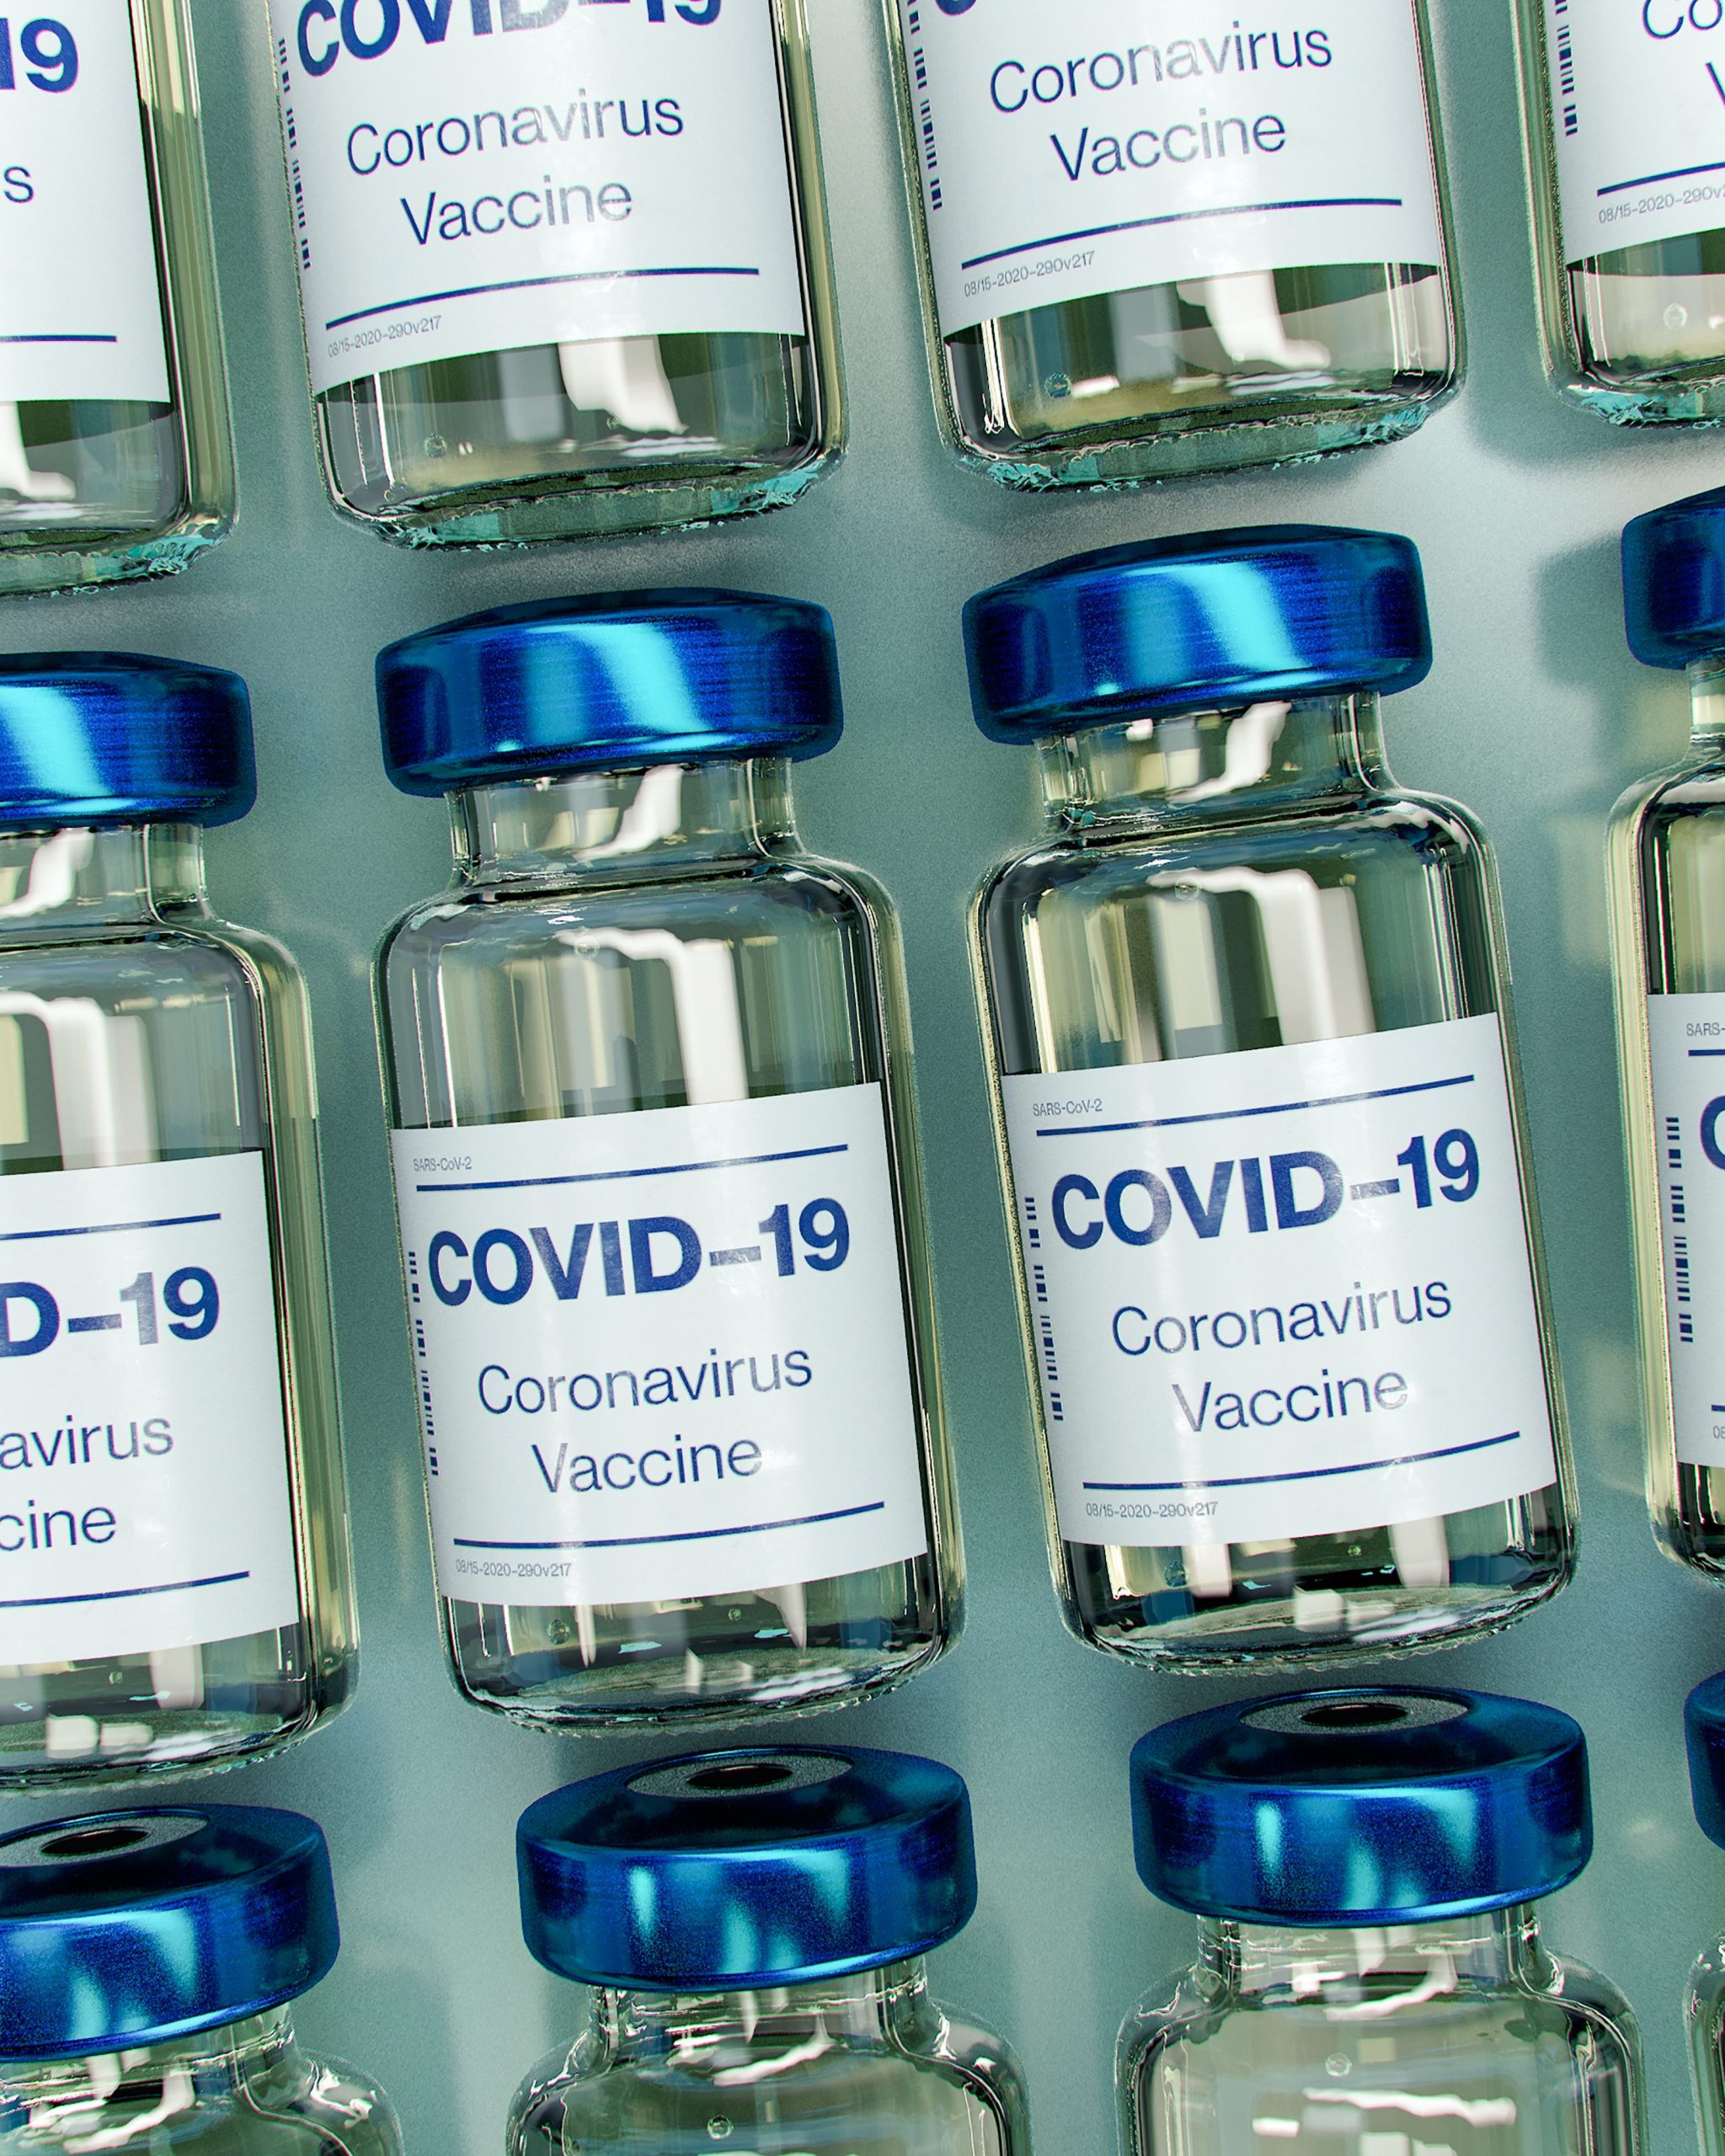 Serum Institute, Bharat Biotech pledge ‘access to vaccines’, a day after row over COVID-19 vaccine